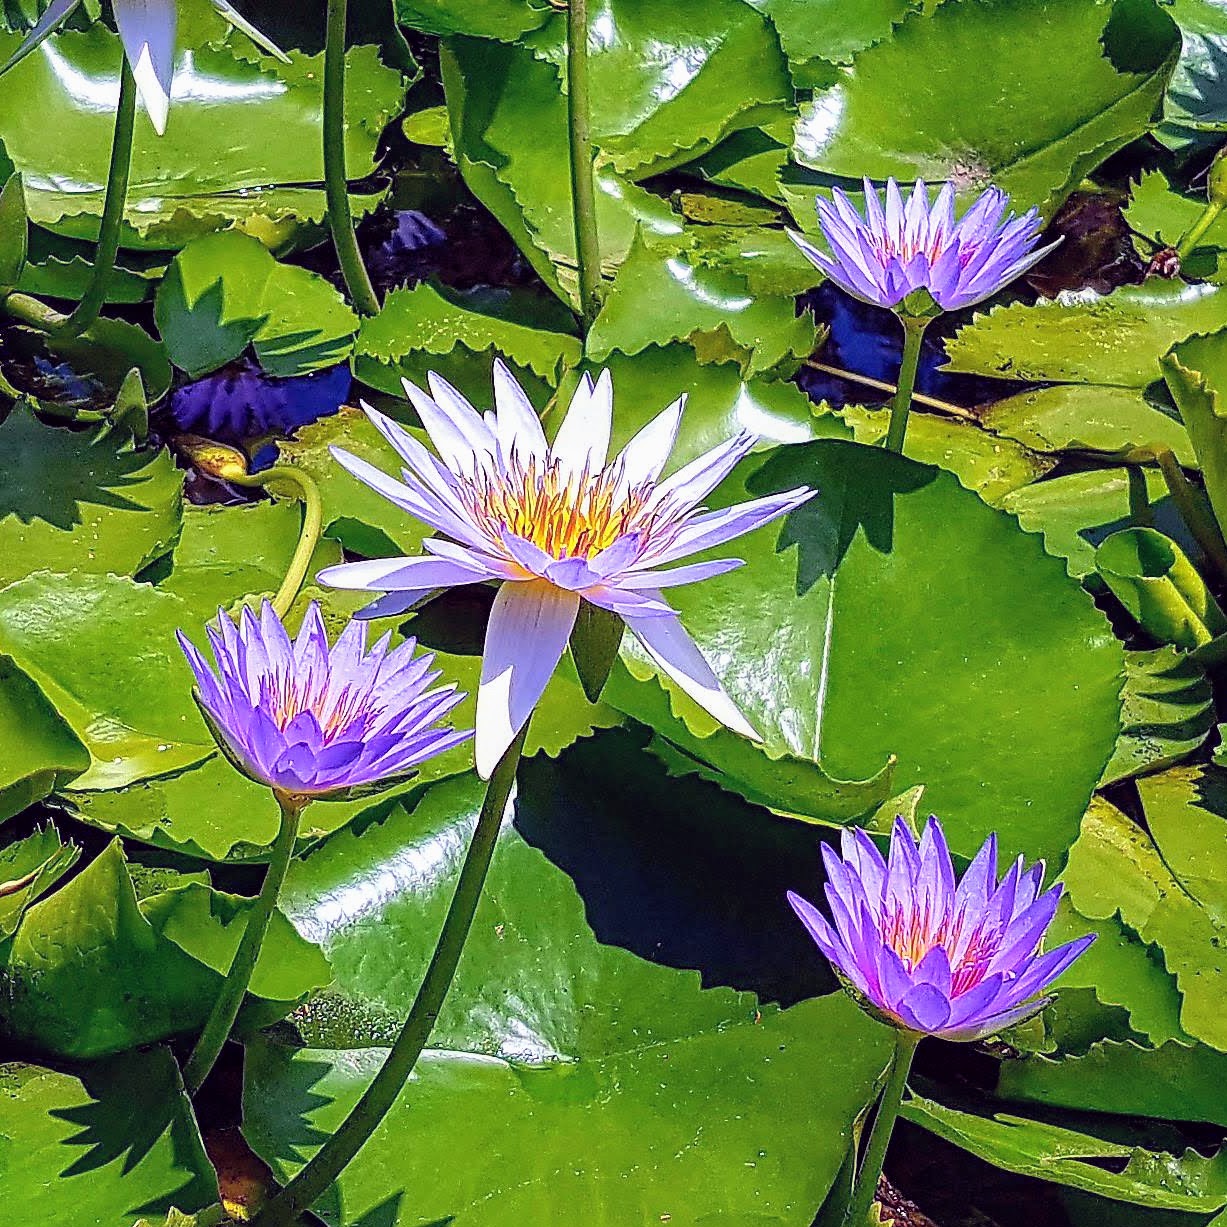 blue lotus flower pictures